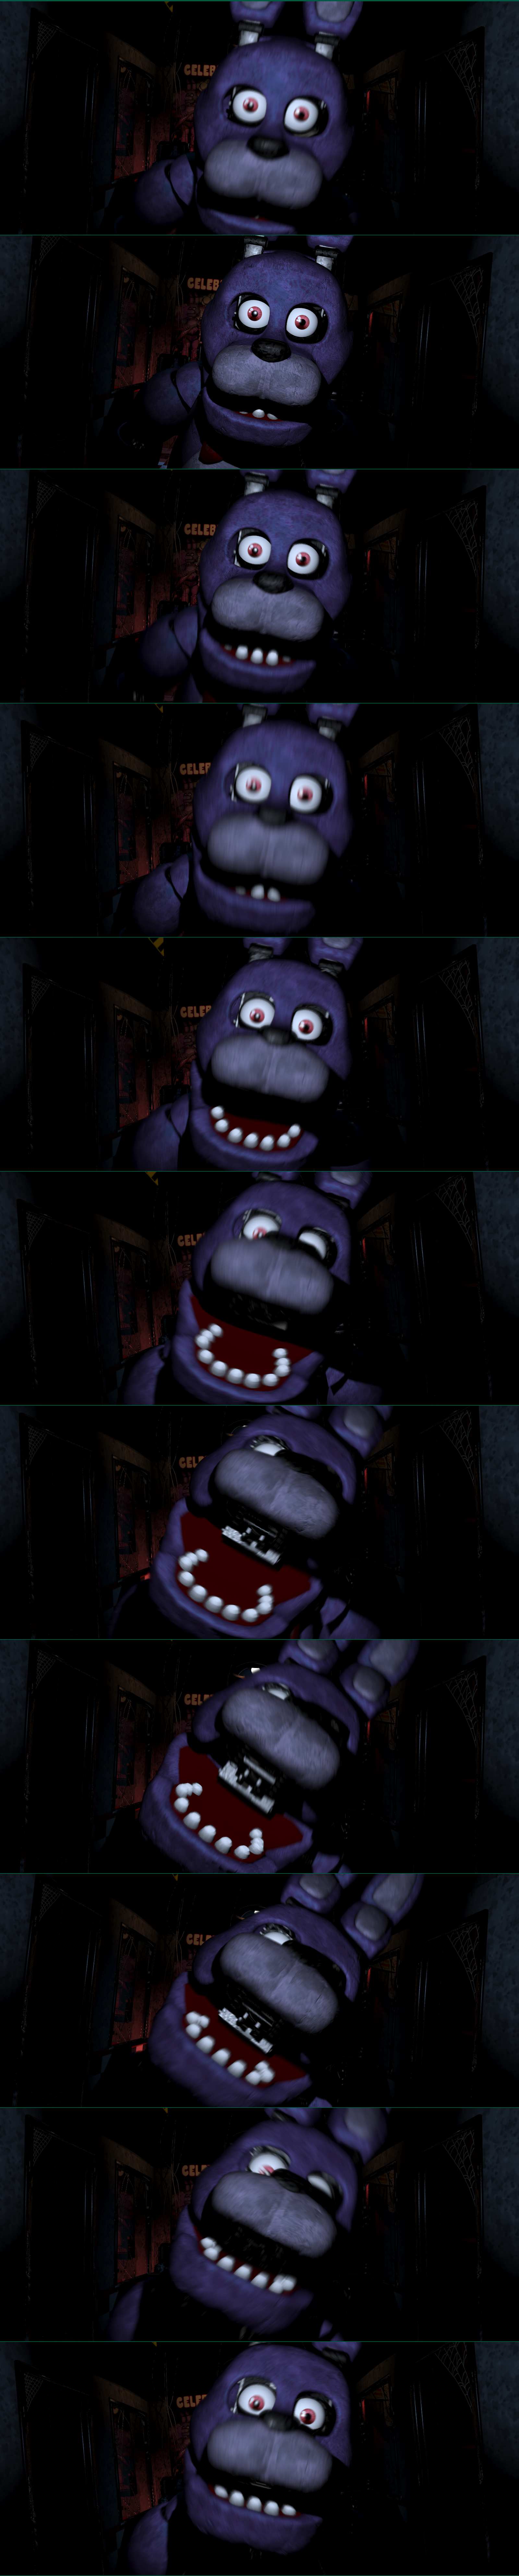 Five Nights at Freddy's - Bonnie Jumpscare